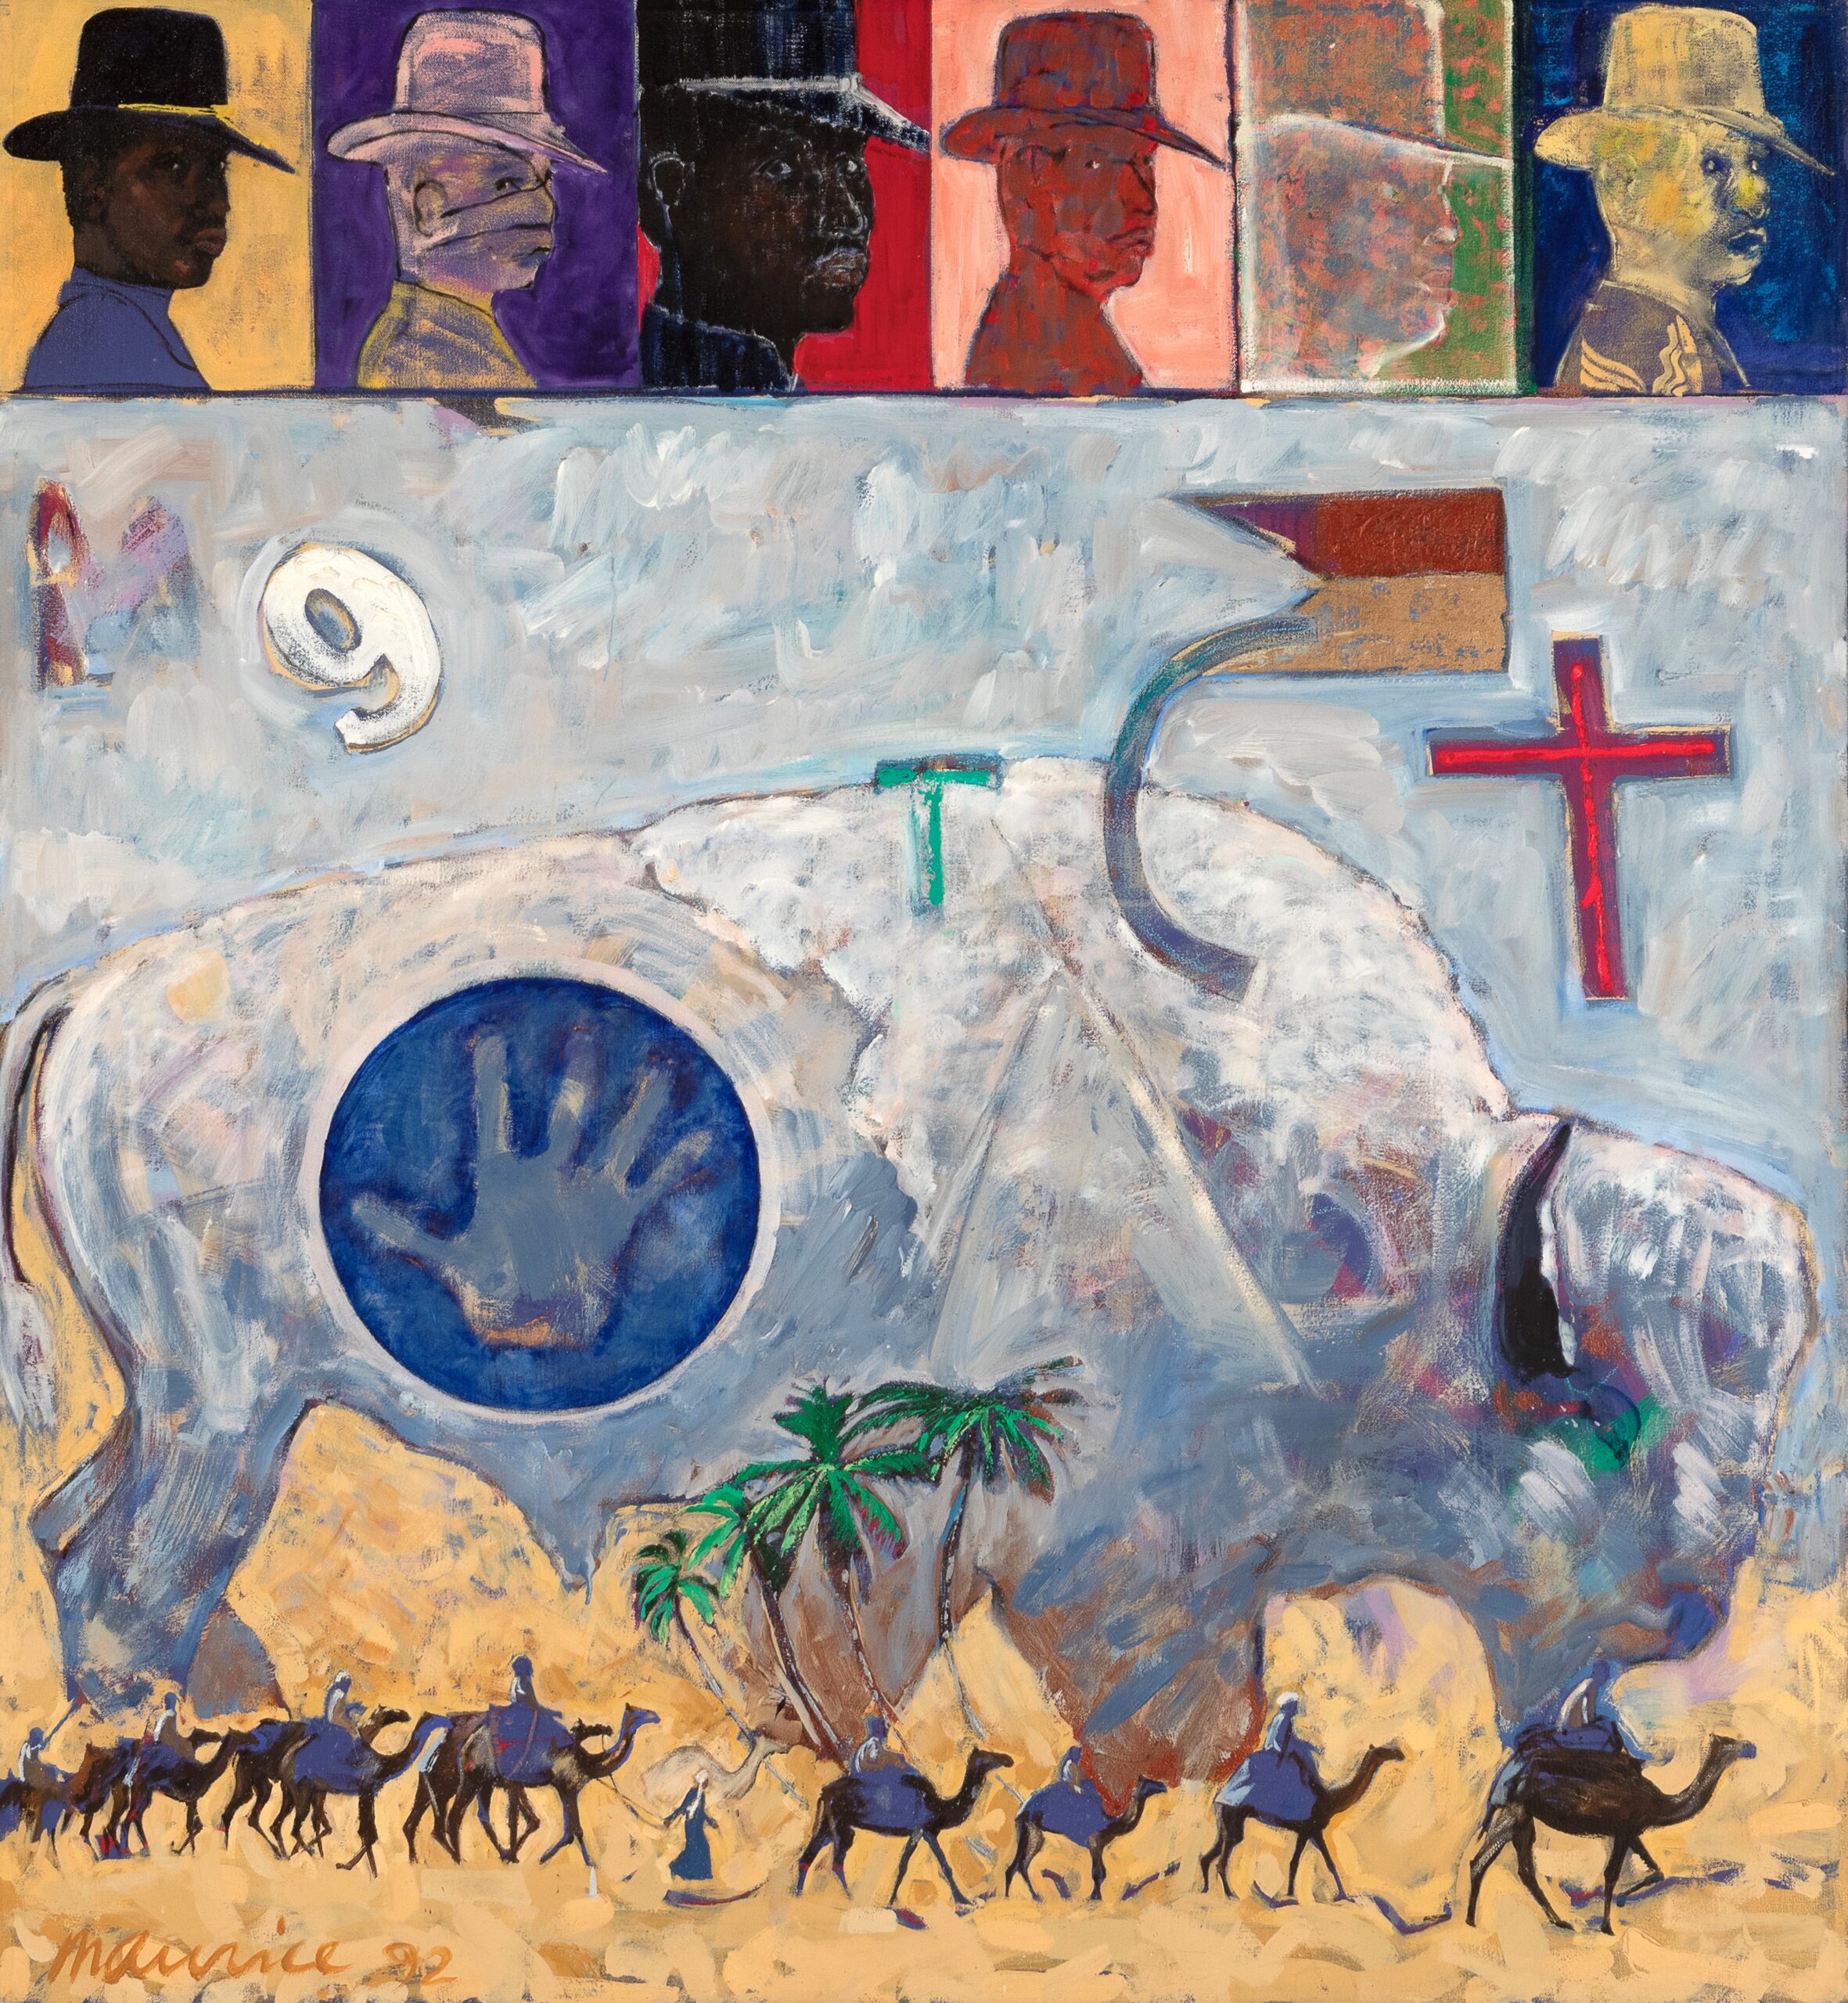 
		                					Maurice Burns		                																	
																											<i>Buffalo Solider,</i>  
																																								1992, 
																																								oil on canvas, 
																																								48 x 44 x 1 1/2 inches 
																								
		                				